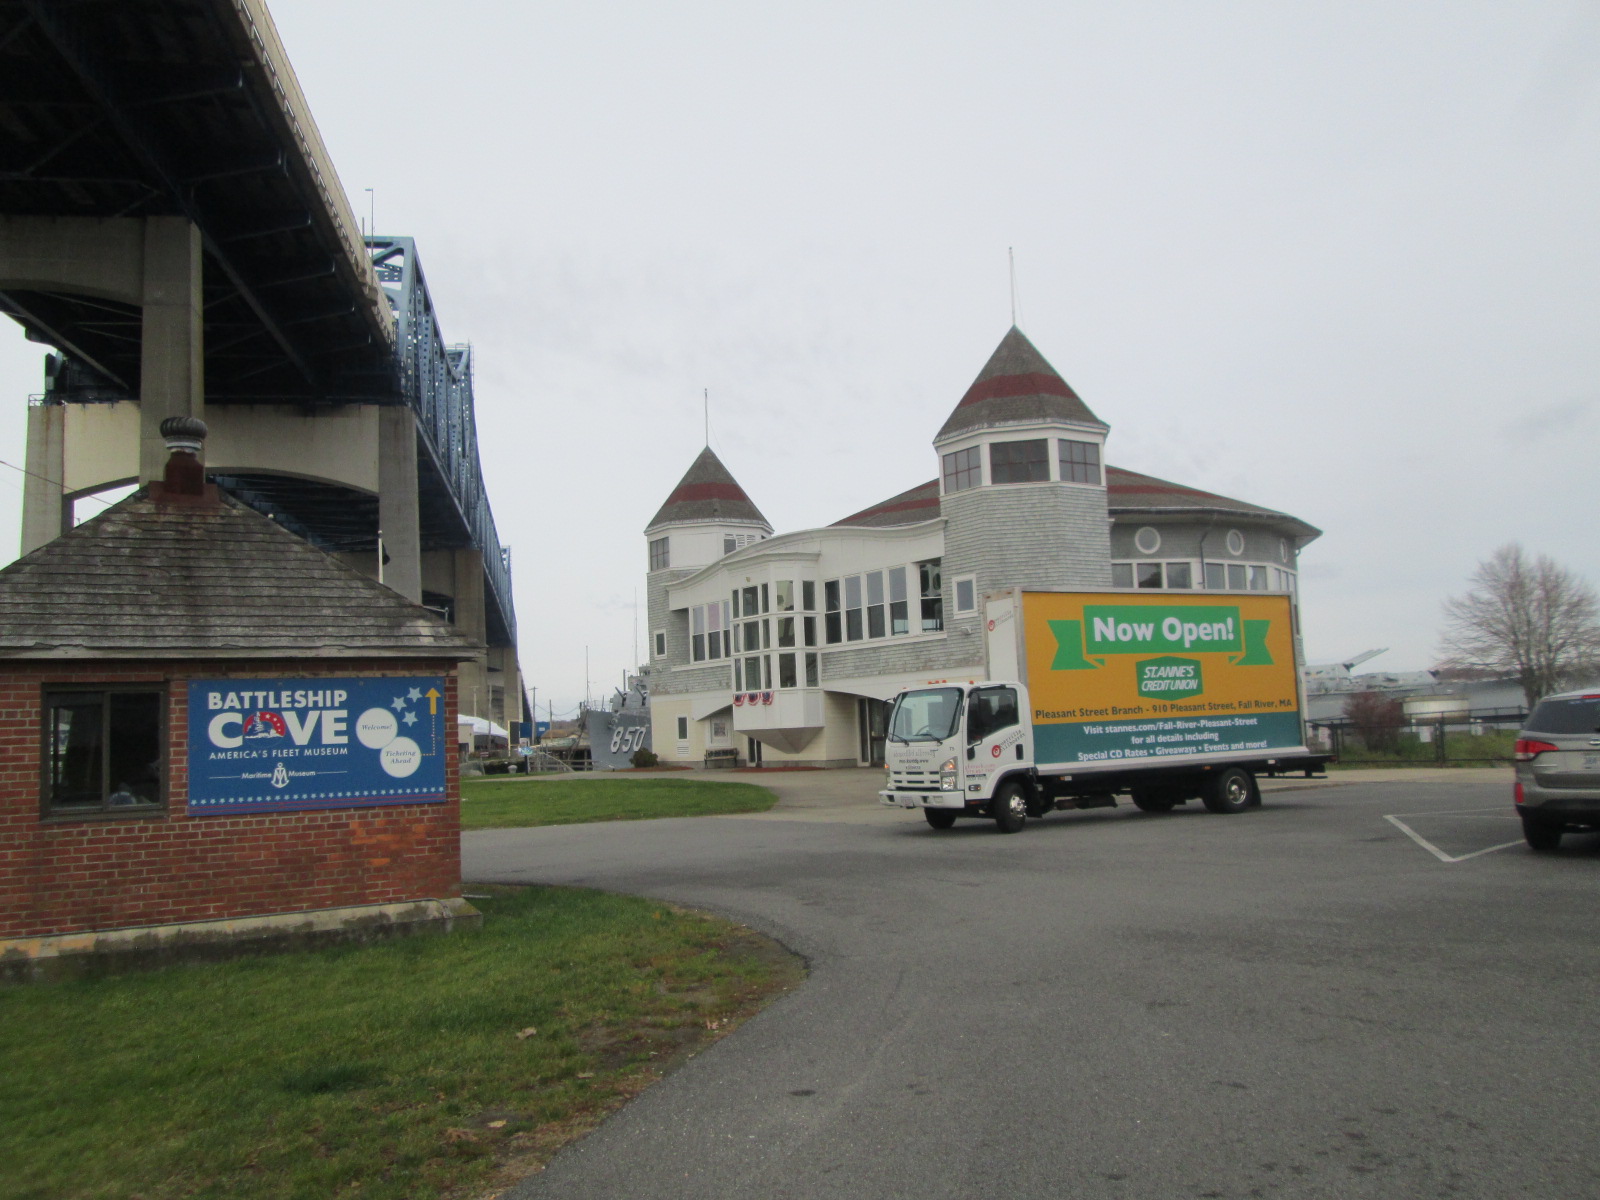 Mobile billboard truck stopped at Battleship Cove in Fall River MA